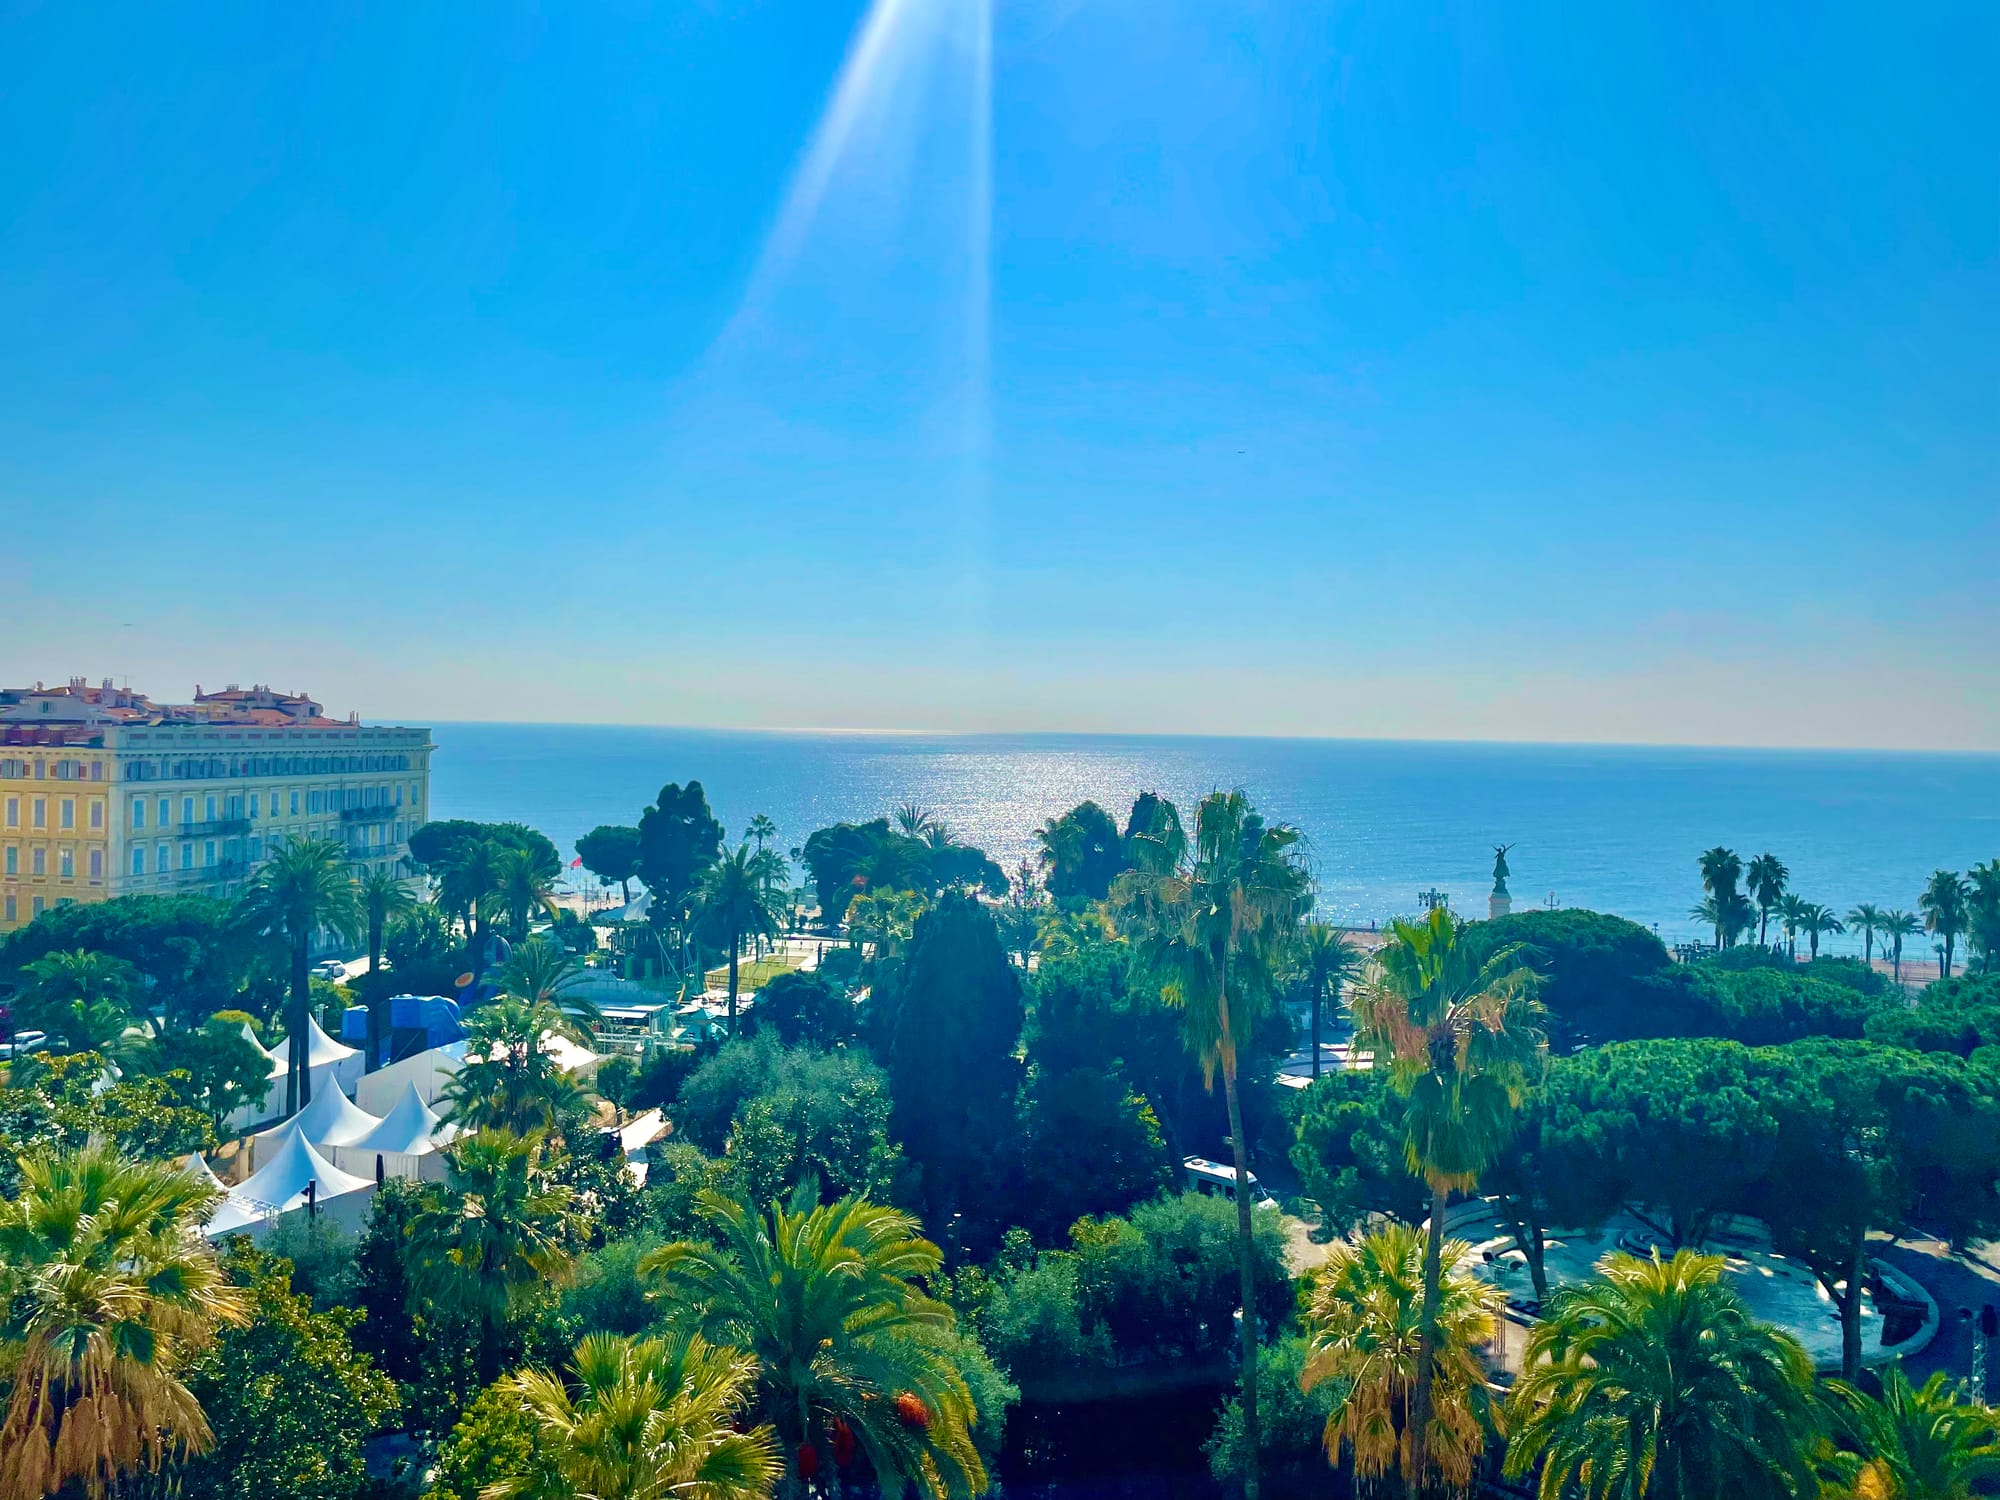 Breathtaking view of the Côte d'Azur from the Anantara Plaza Nice Hotel; lush evergreens and pine trees crowd a garden strip before the sparkling sea, like a Dufy painting come to life